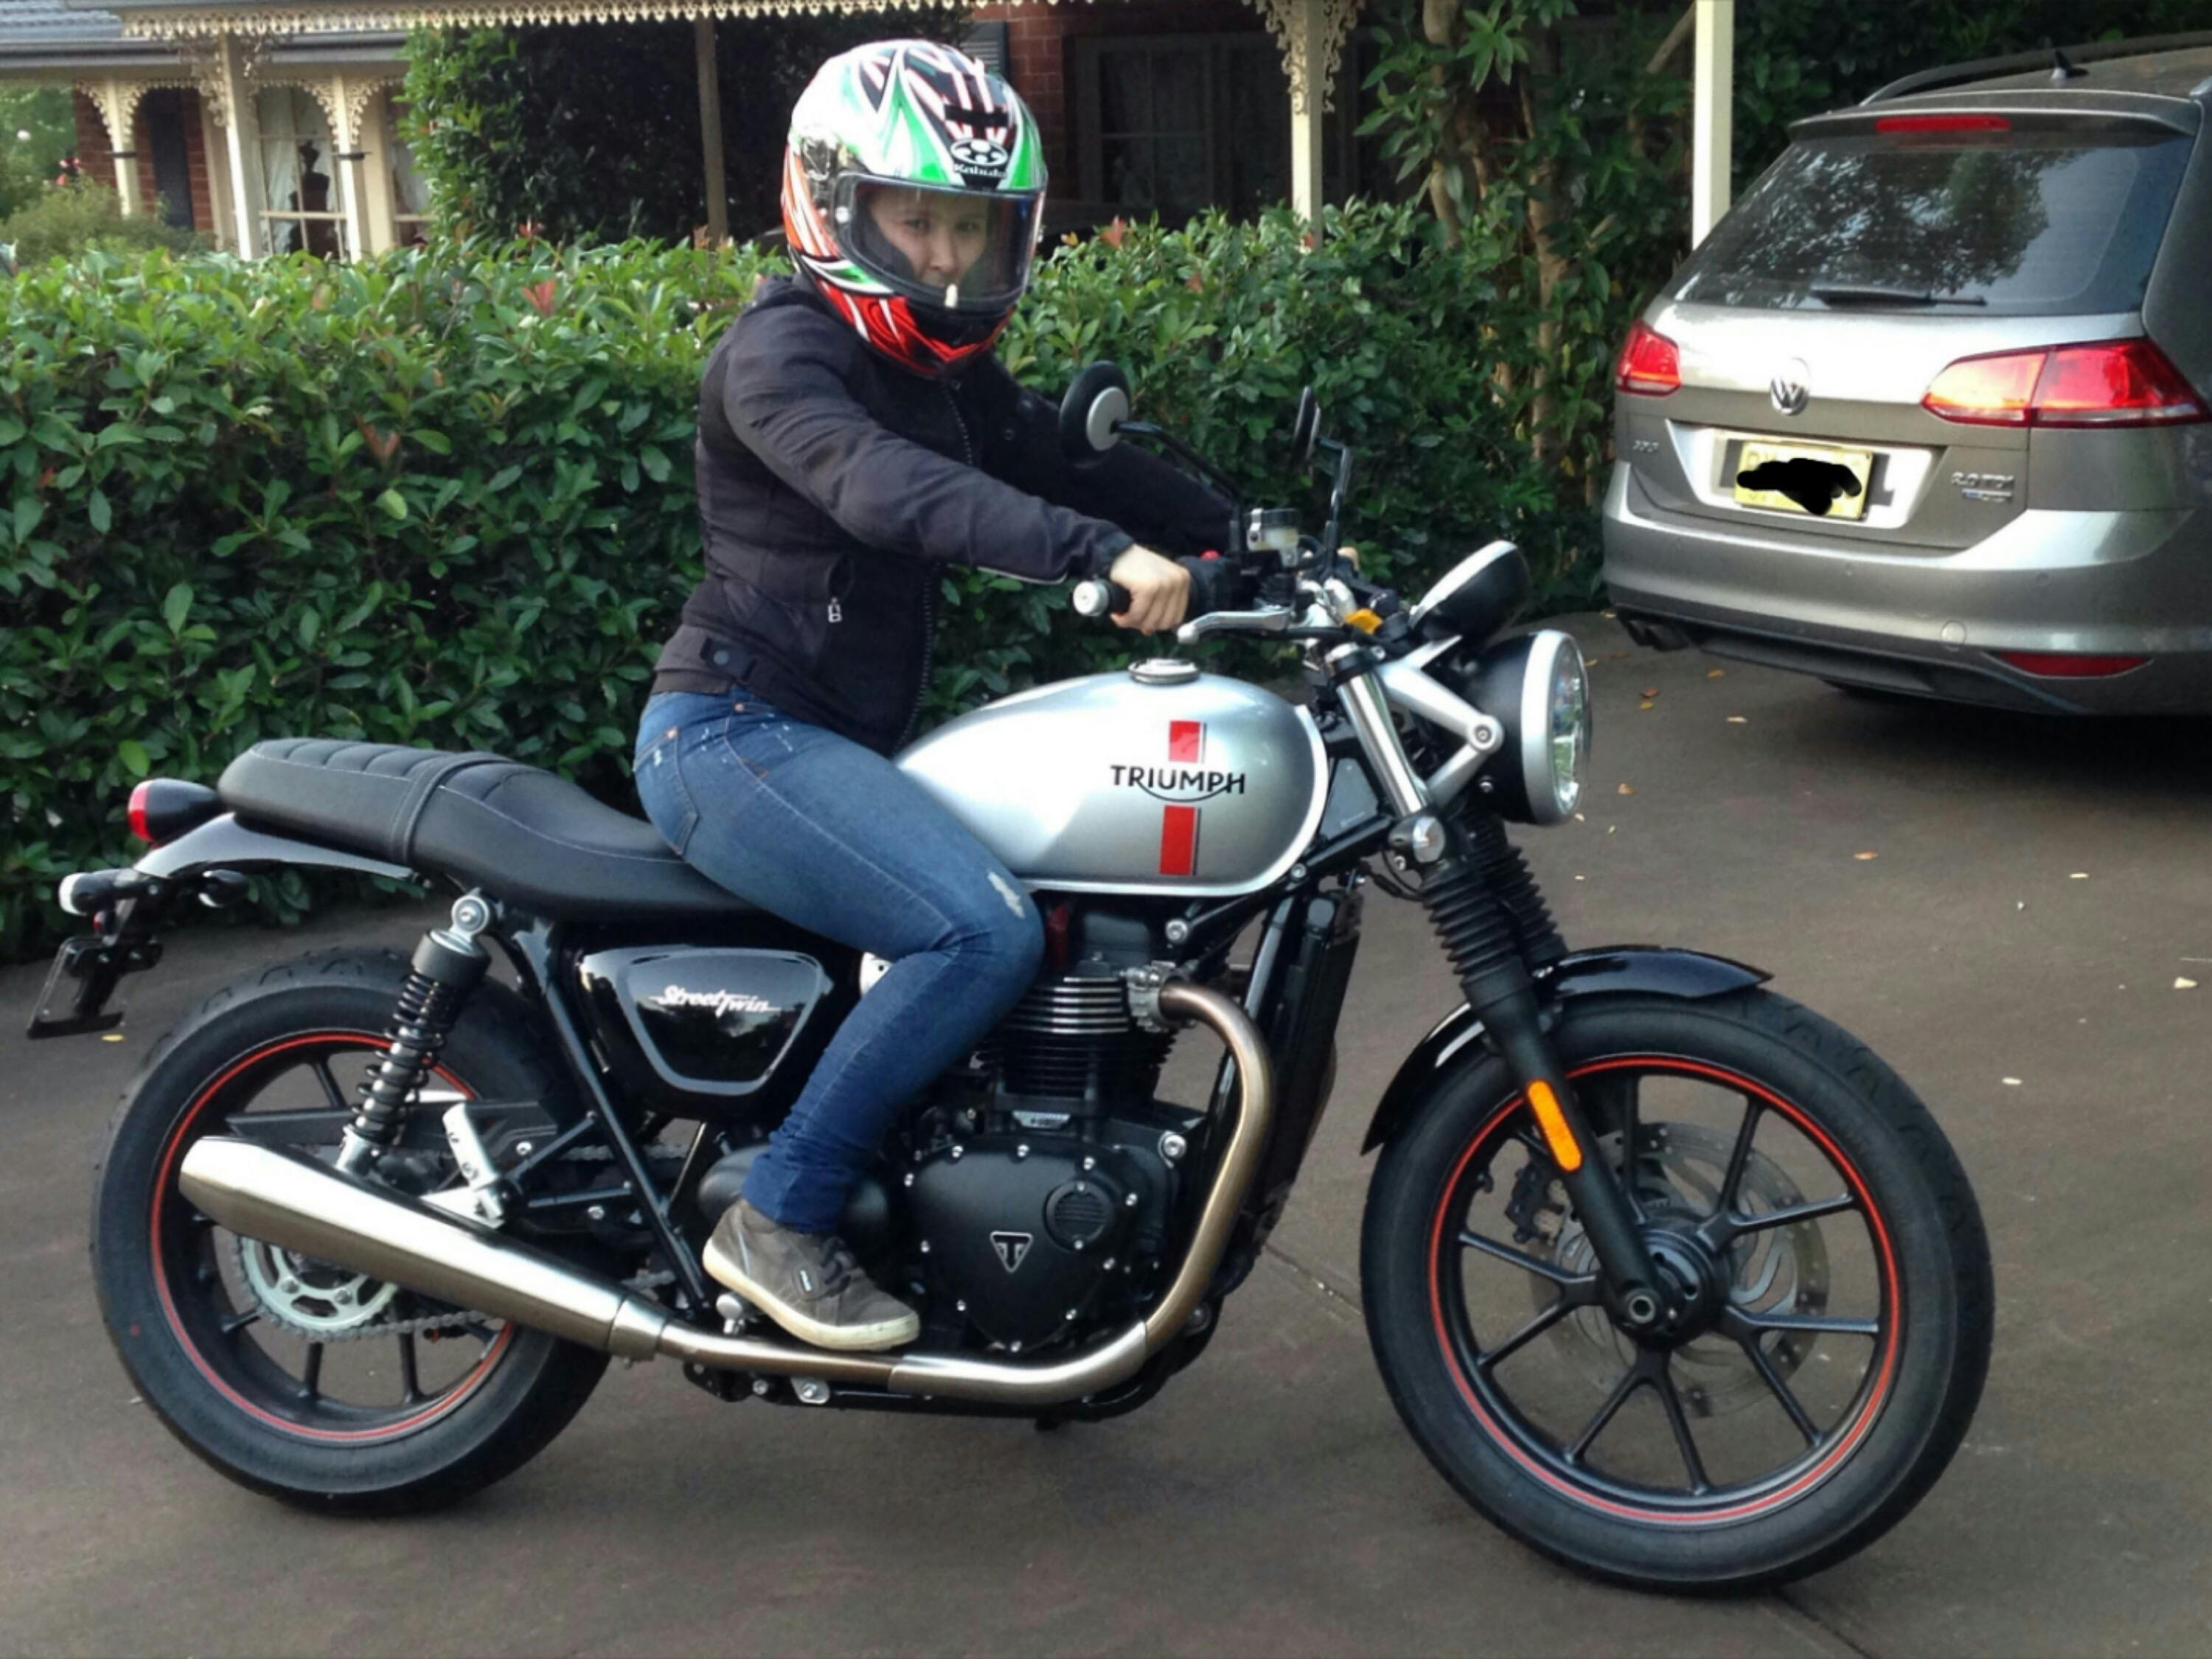 Woman on Triumph Street Twin Motorcycle with helmet and jacket